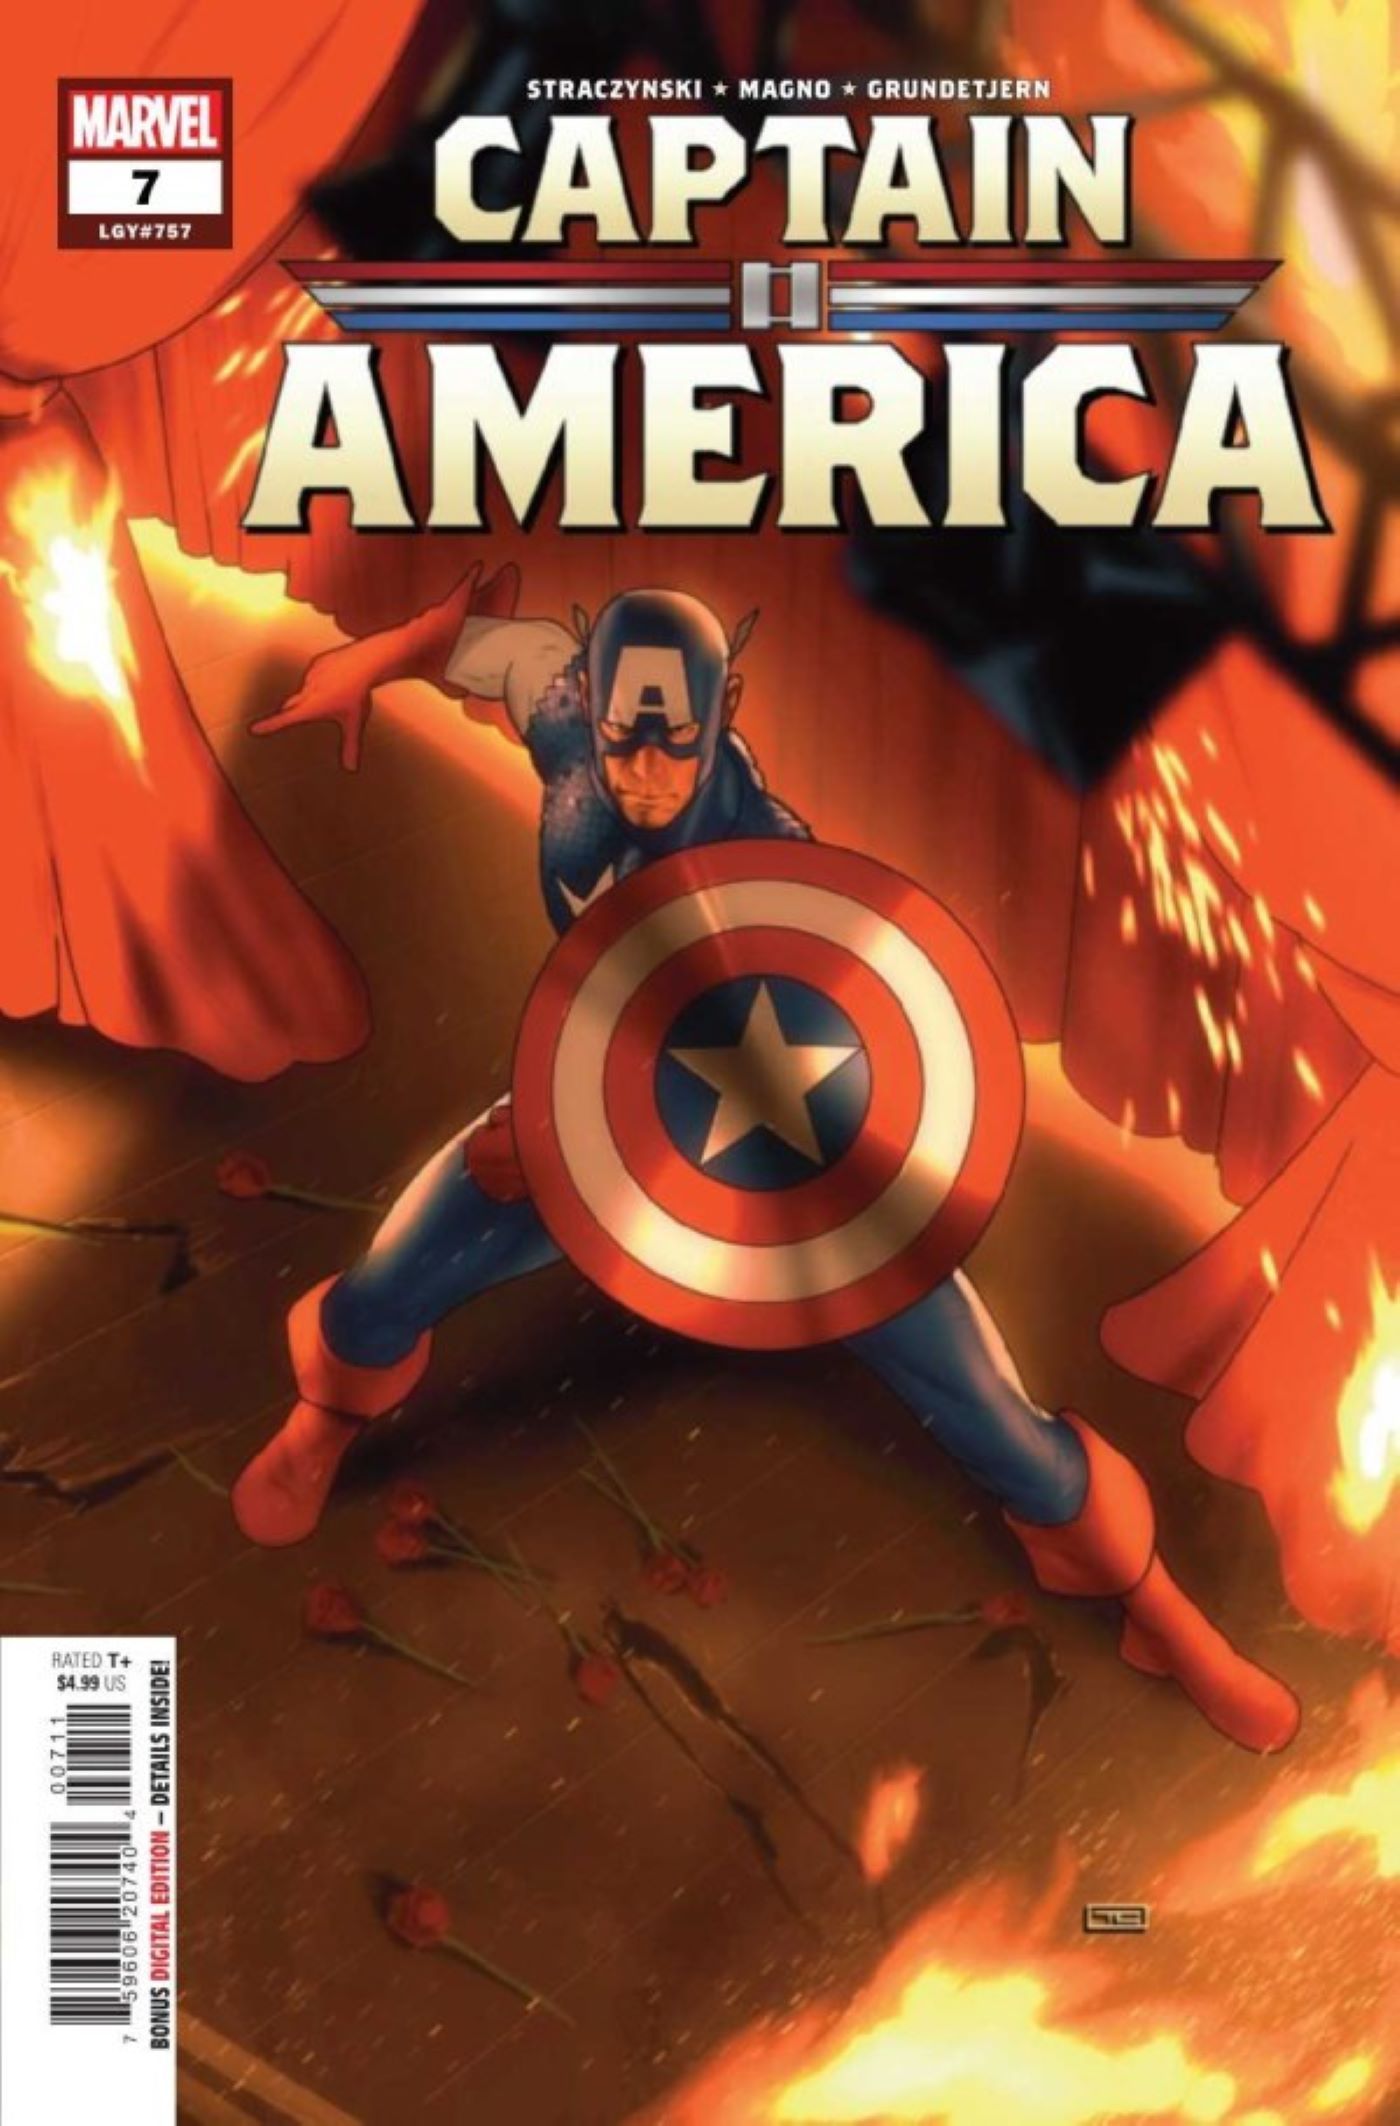 Captain America #7 cover featuring Steve Rogers